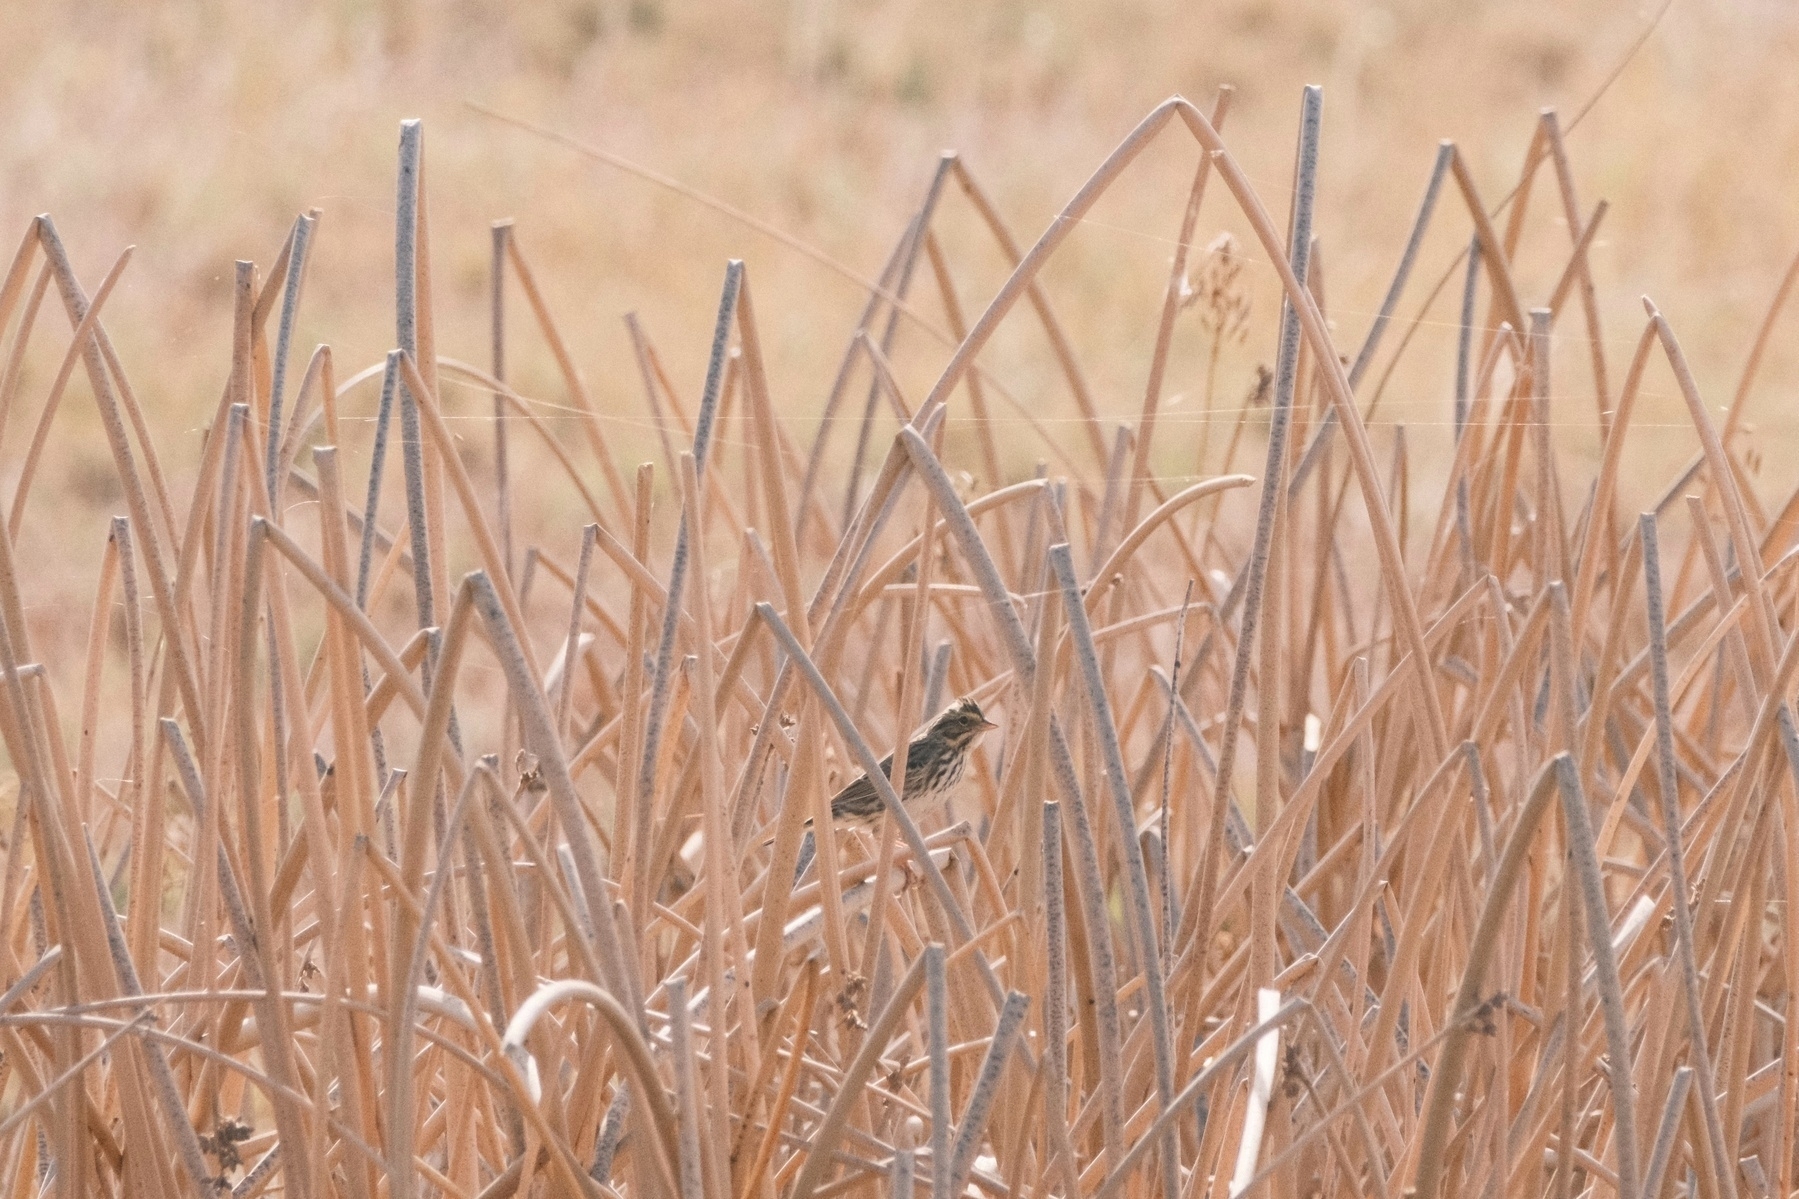 A small bird perched in dense brown reeds.